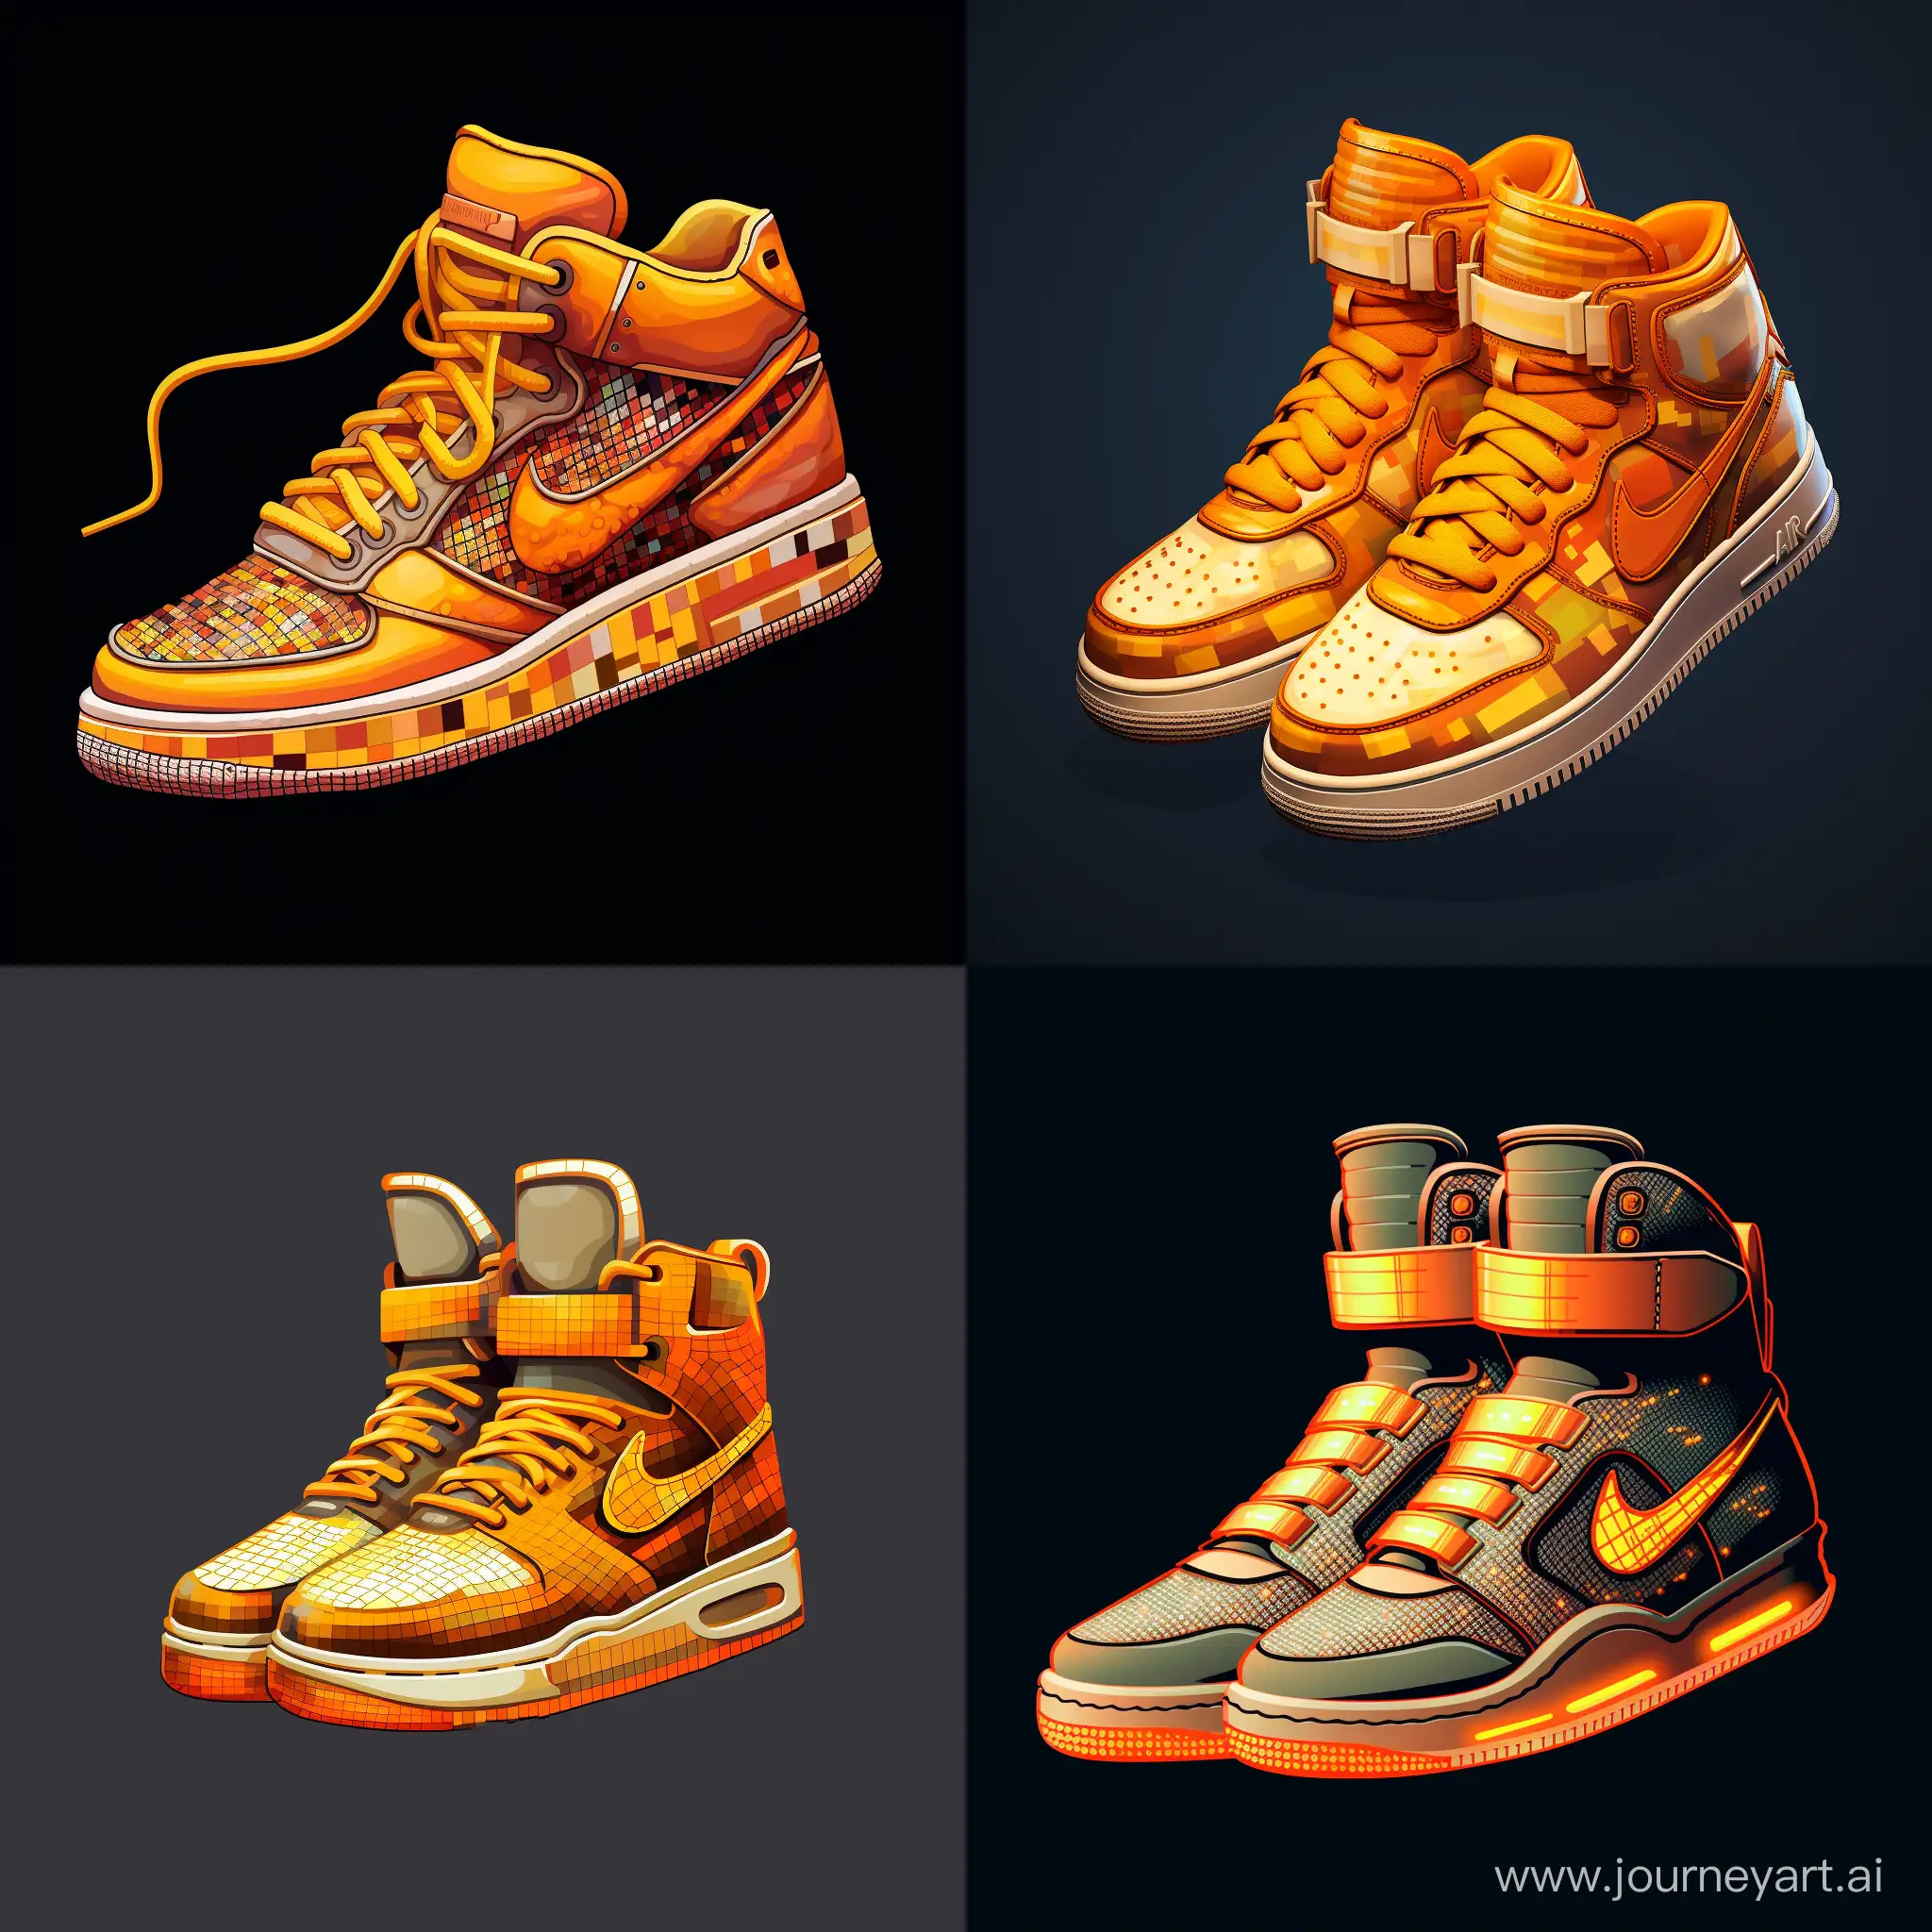 Glowing-Pixel-Art-Sneakers-in-Vibrant-Orange-and-Yellow-Colors